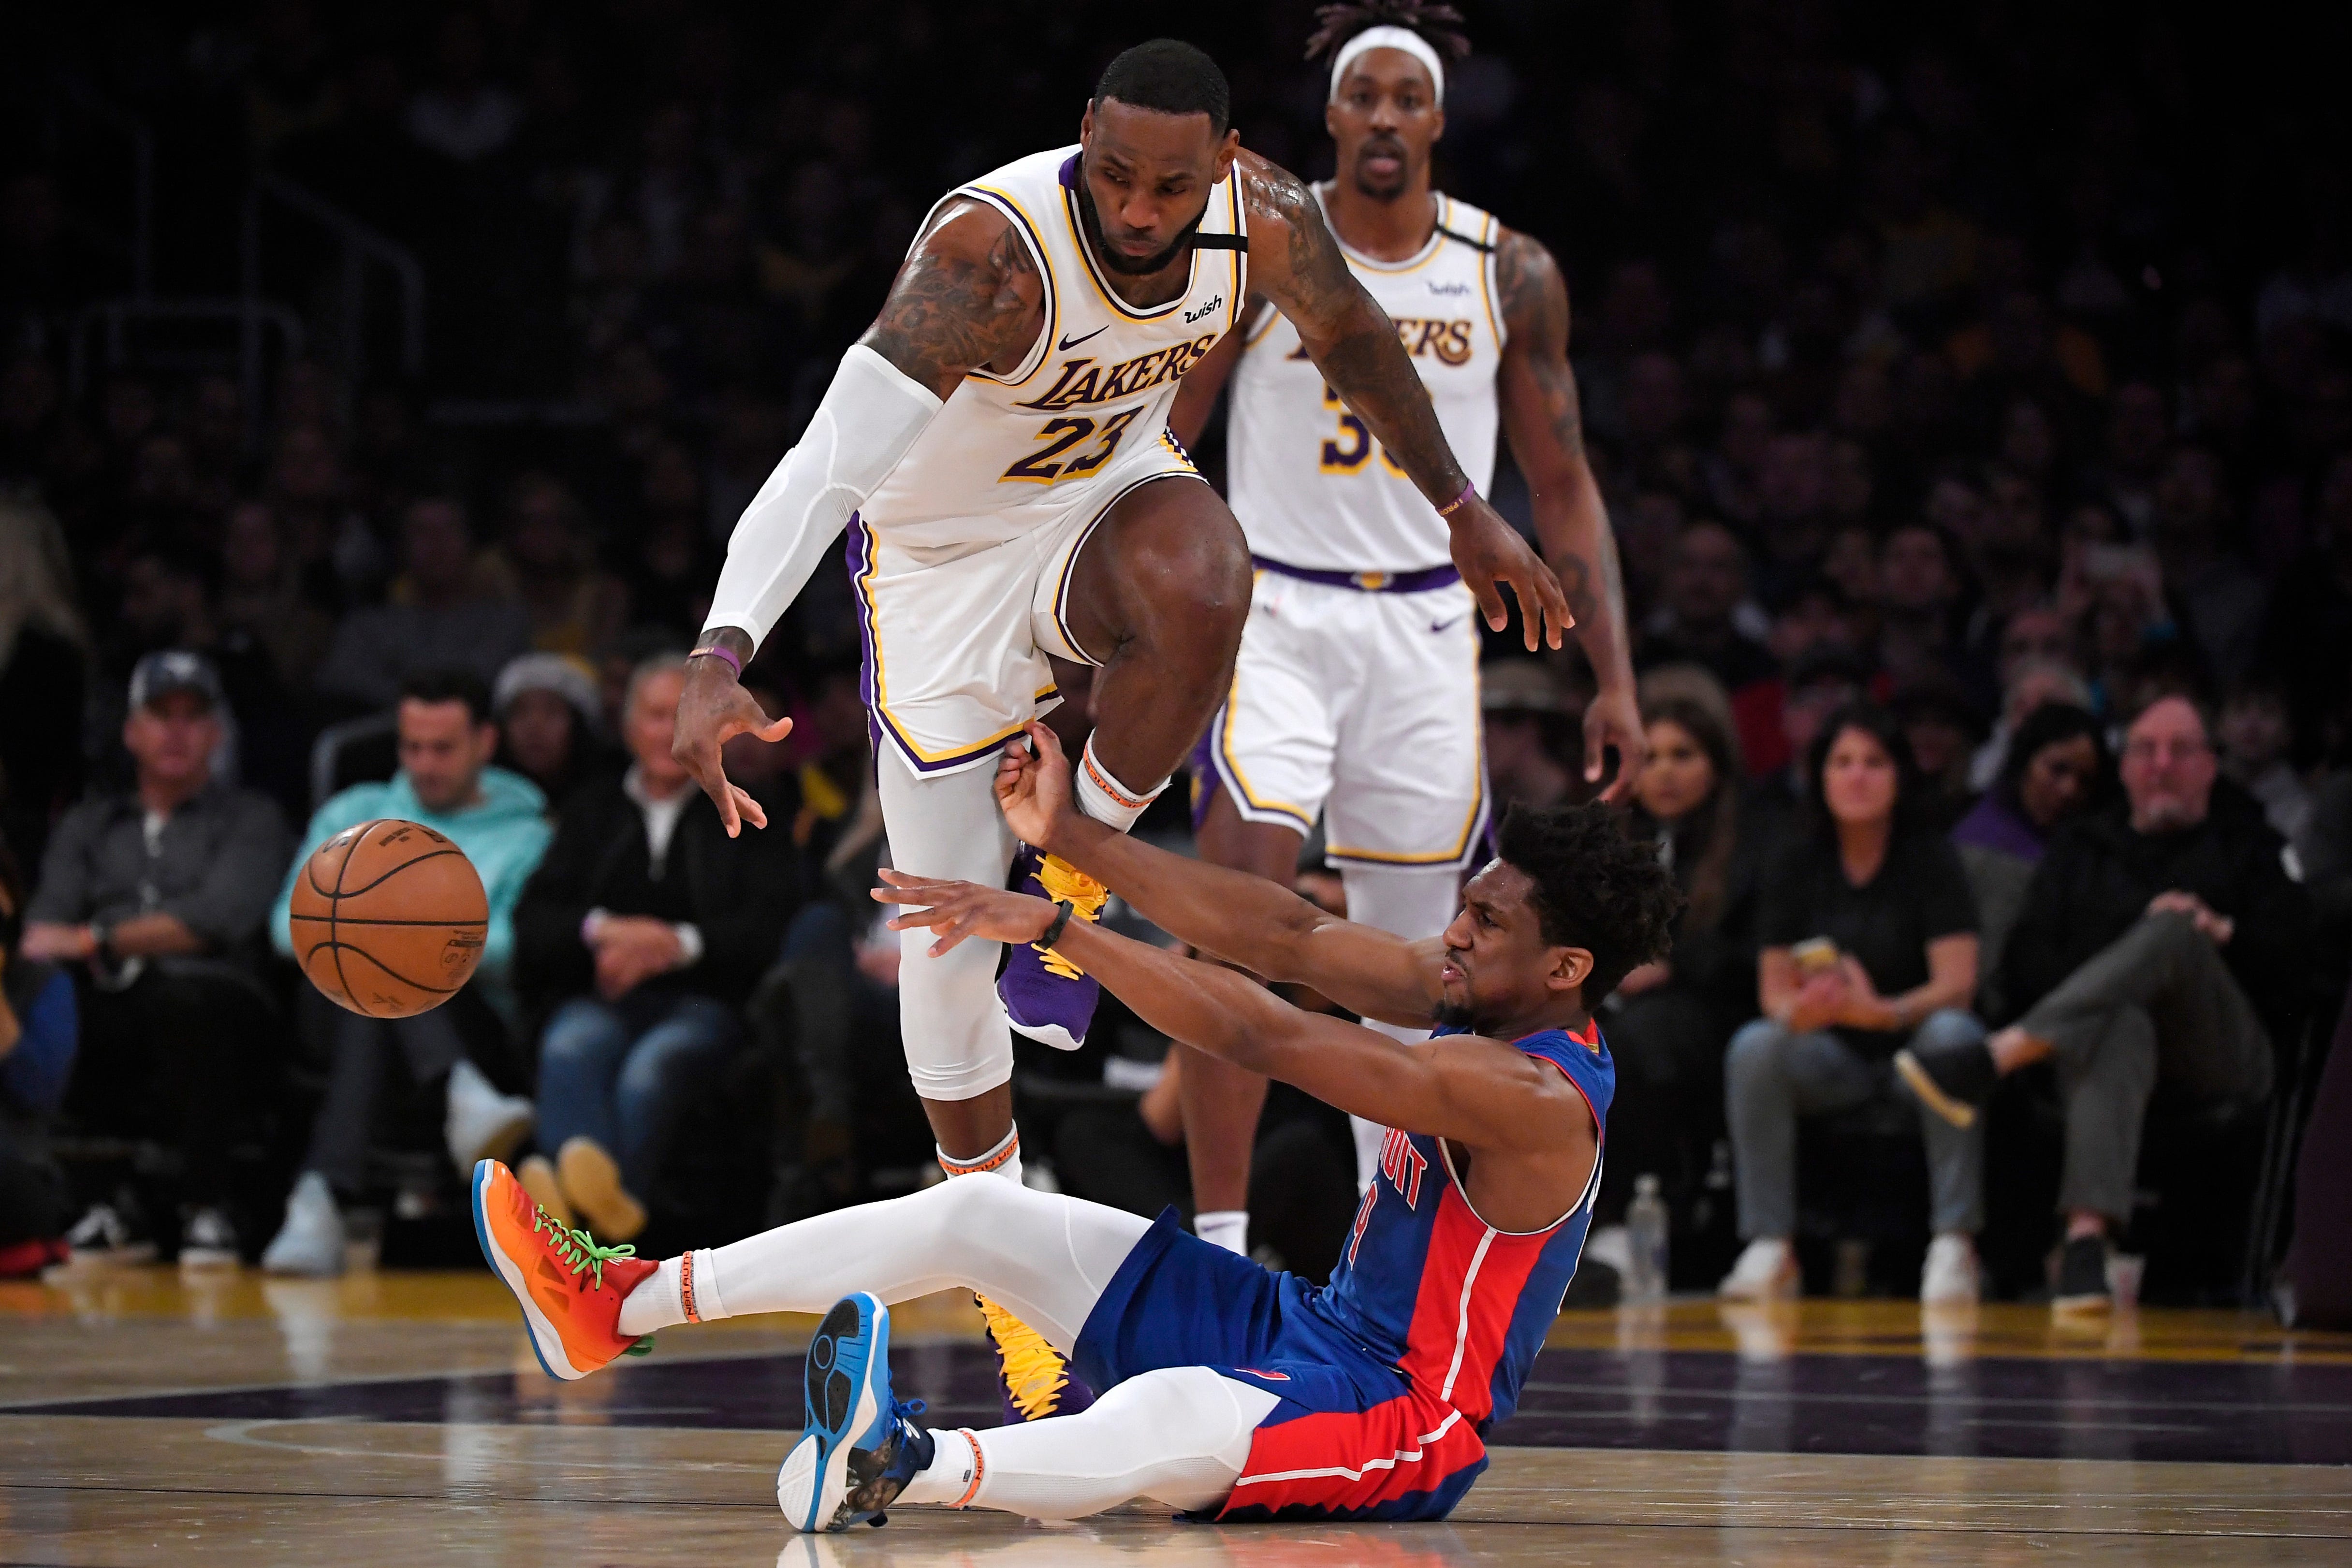 Detroit Pistons guard Langston Galloway, below, passes the ball from the floor as Los Angeles Lakers forward LeBron James, upper left, reaches for it and center Dwight Howard looks on during the first half.